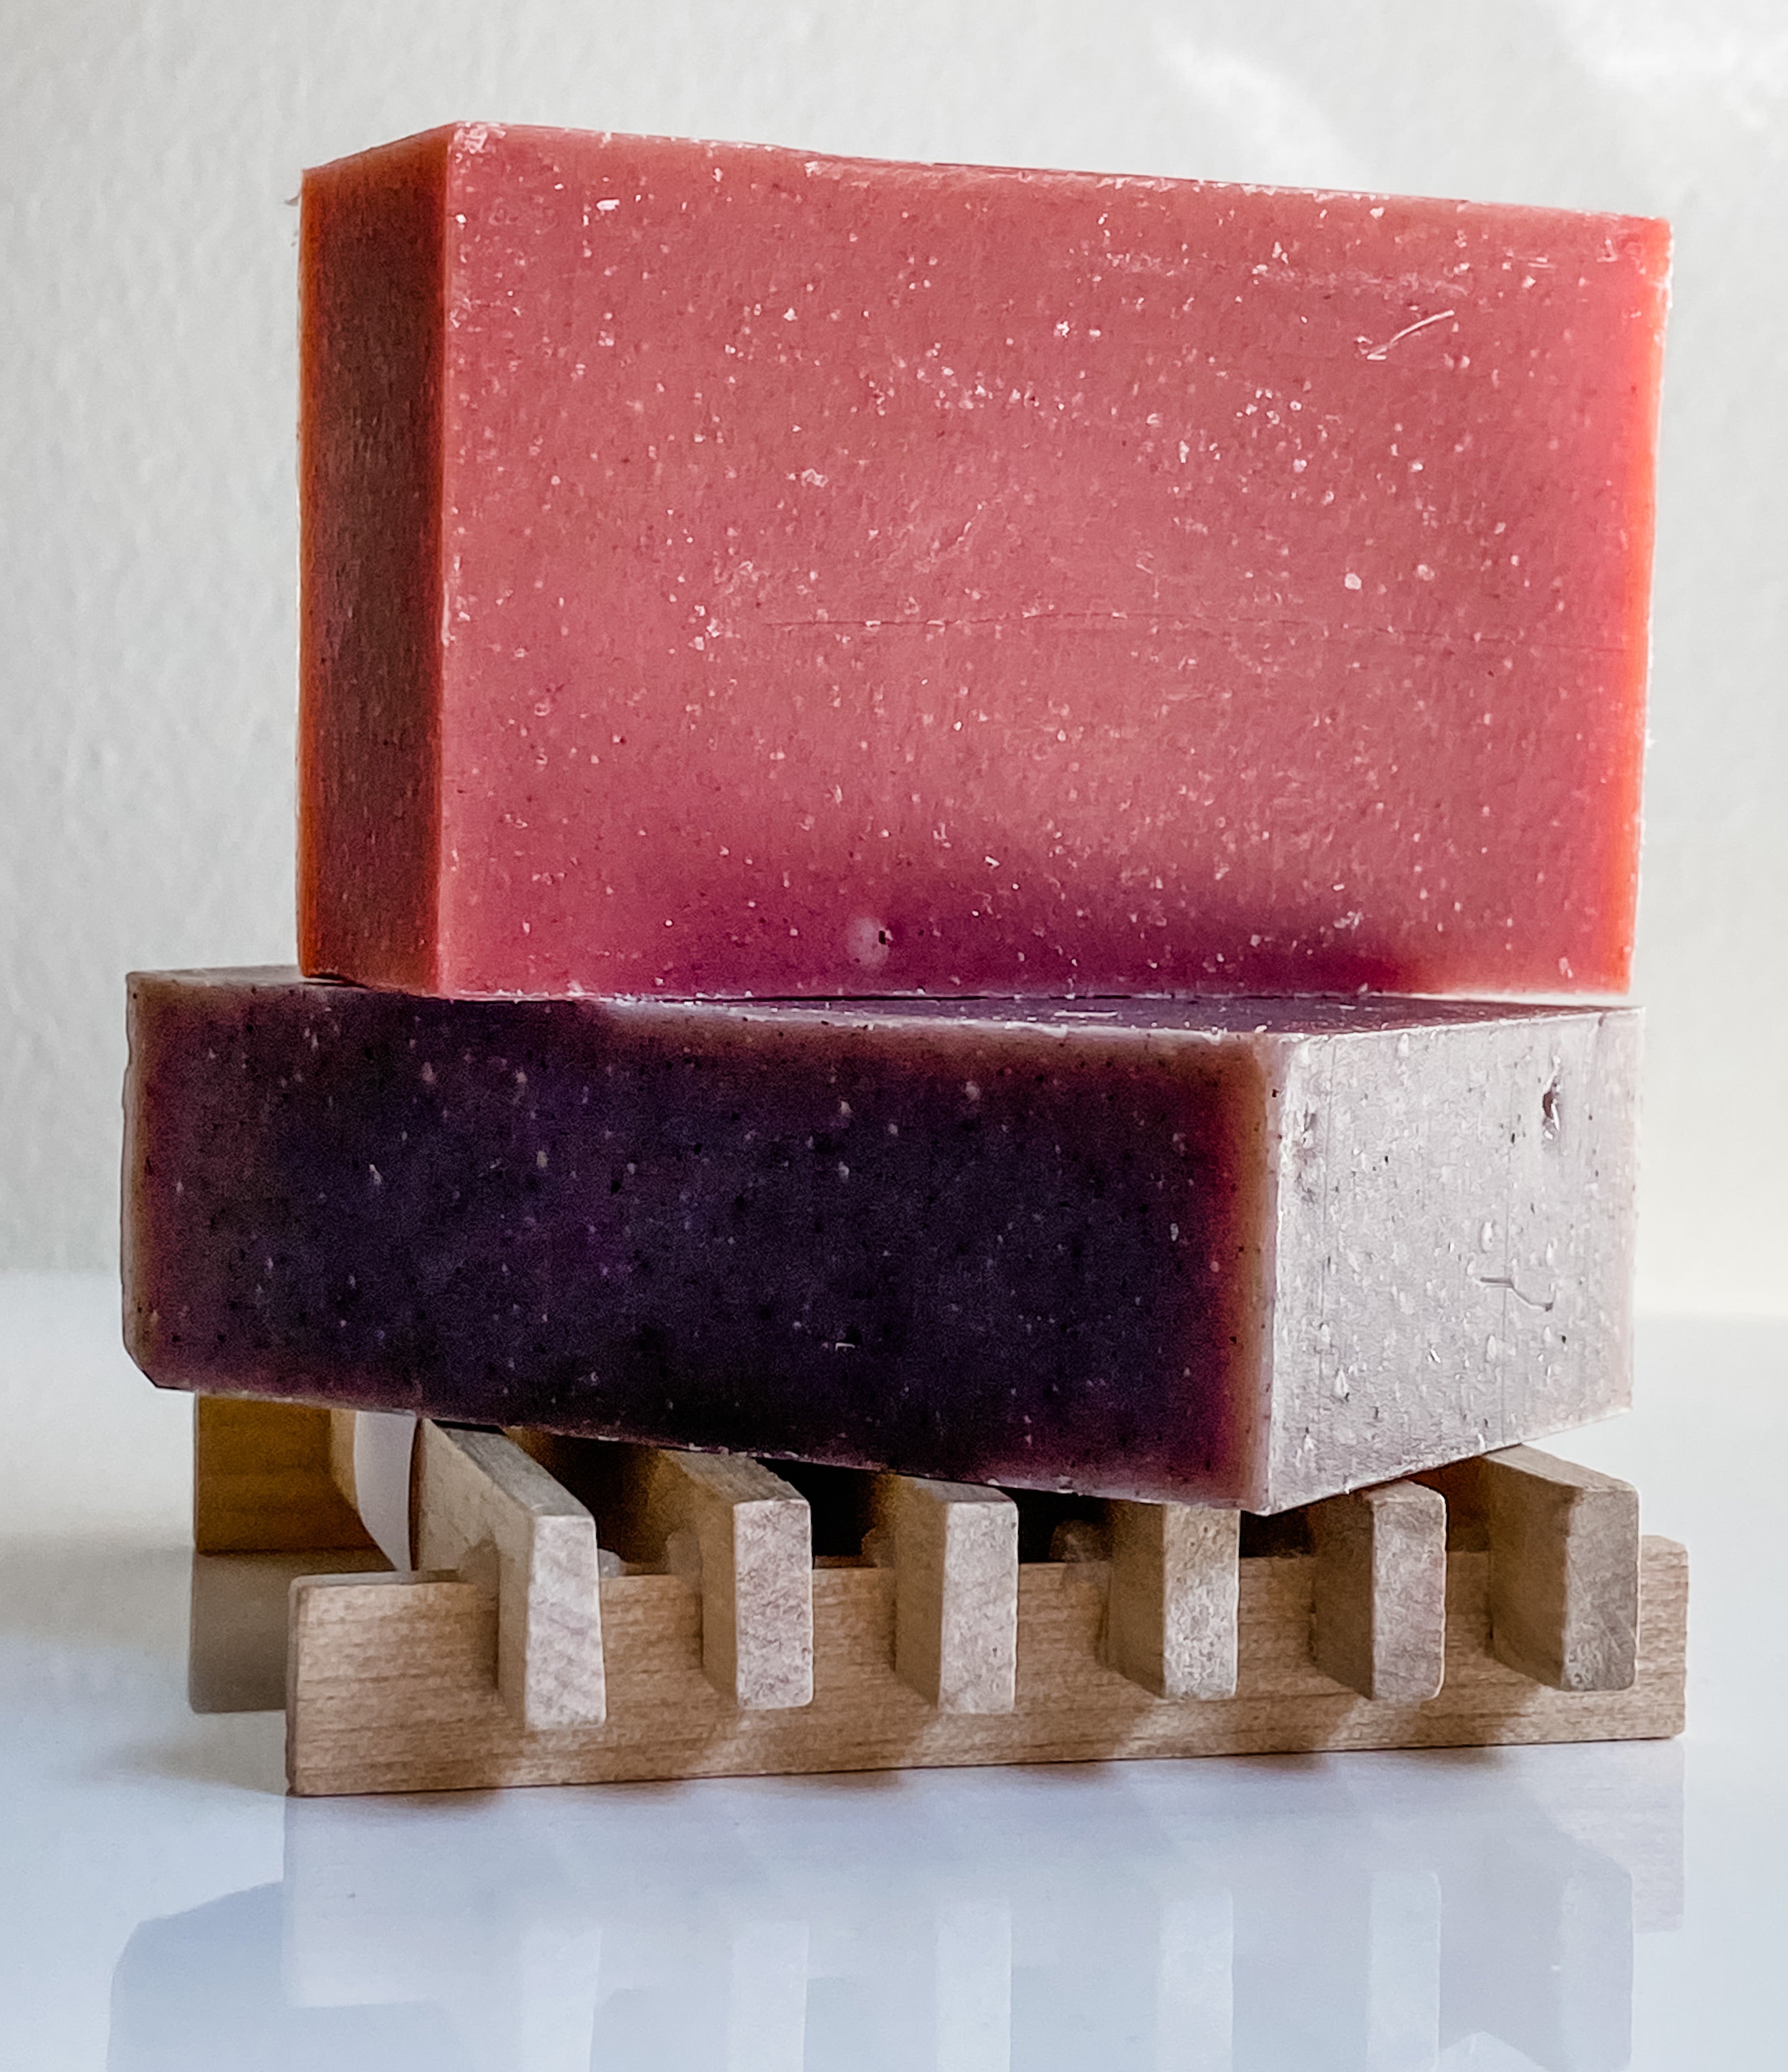 Tree Stay Dry Soap Dish - Handmade with Natural Ingredients. Hidden Forest Naturals